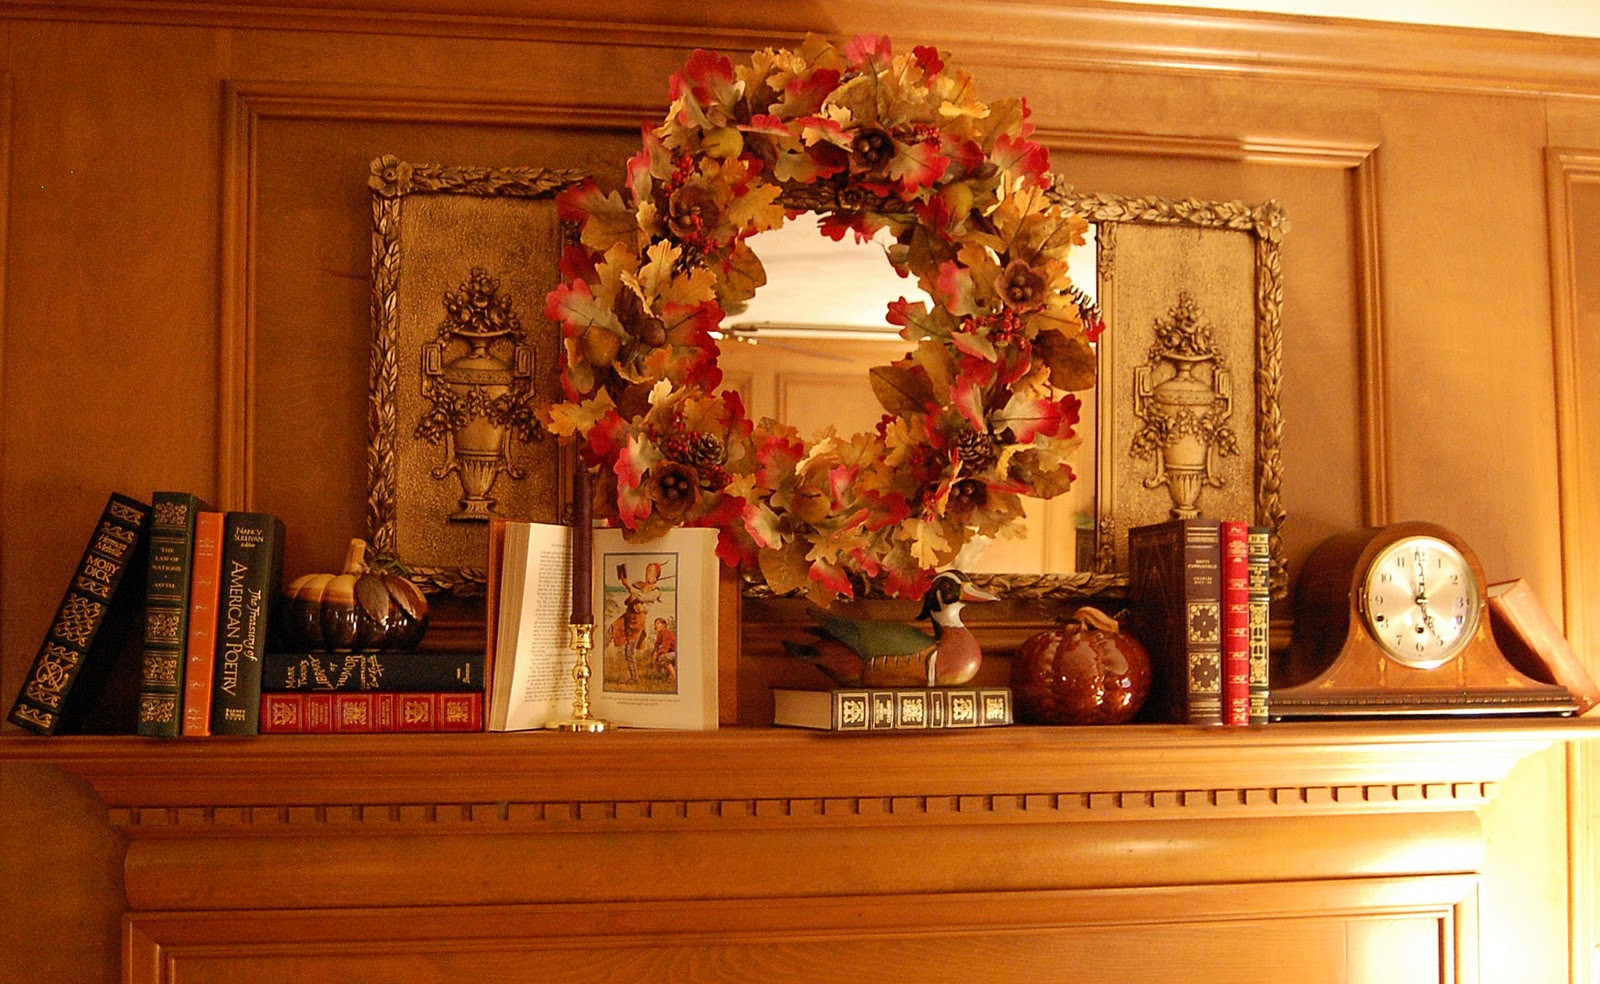 Fall Decorations Fireplace Mantel
 Decorate a Fireplace Mantel for Fall or Autumn with Books